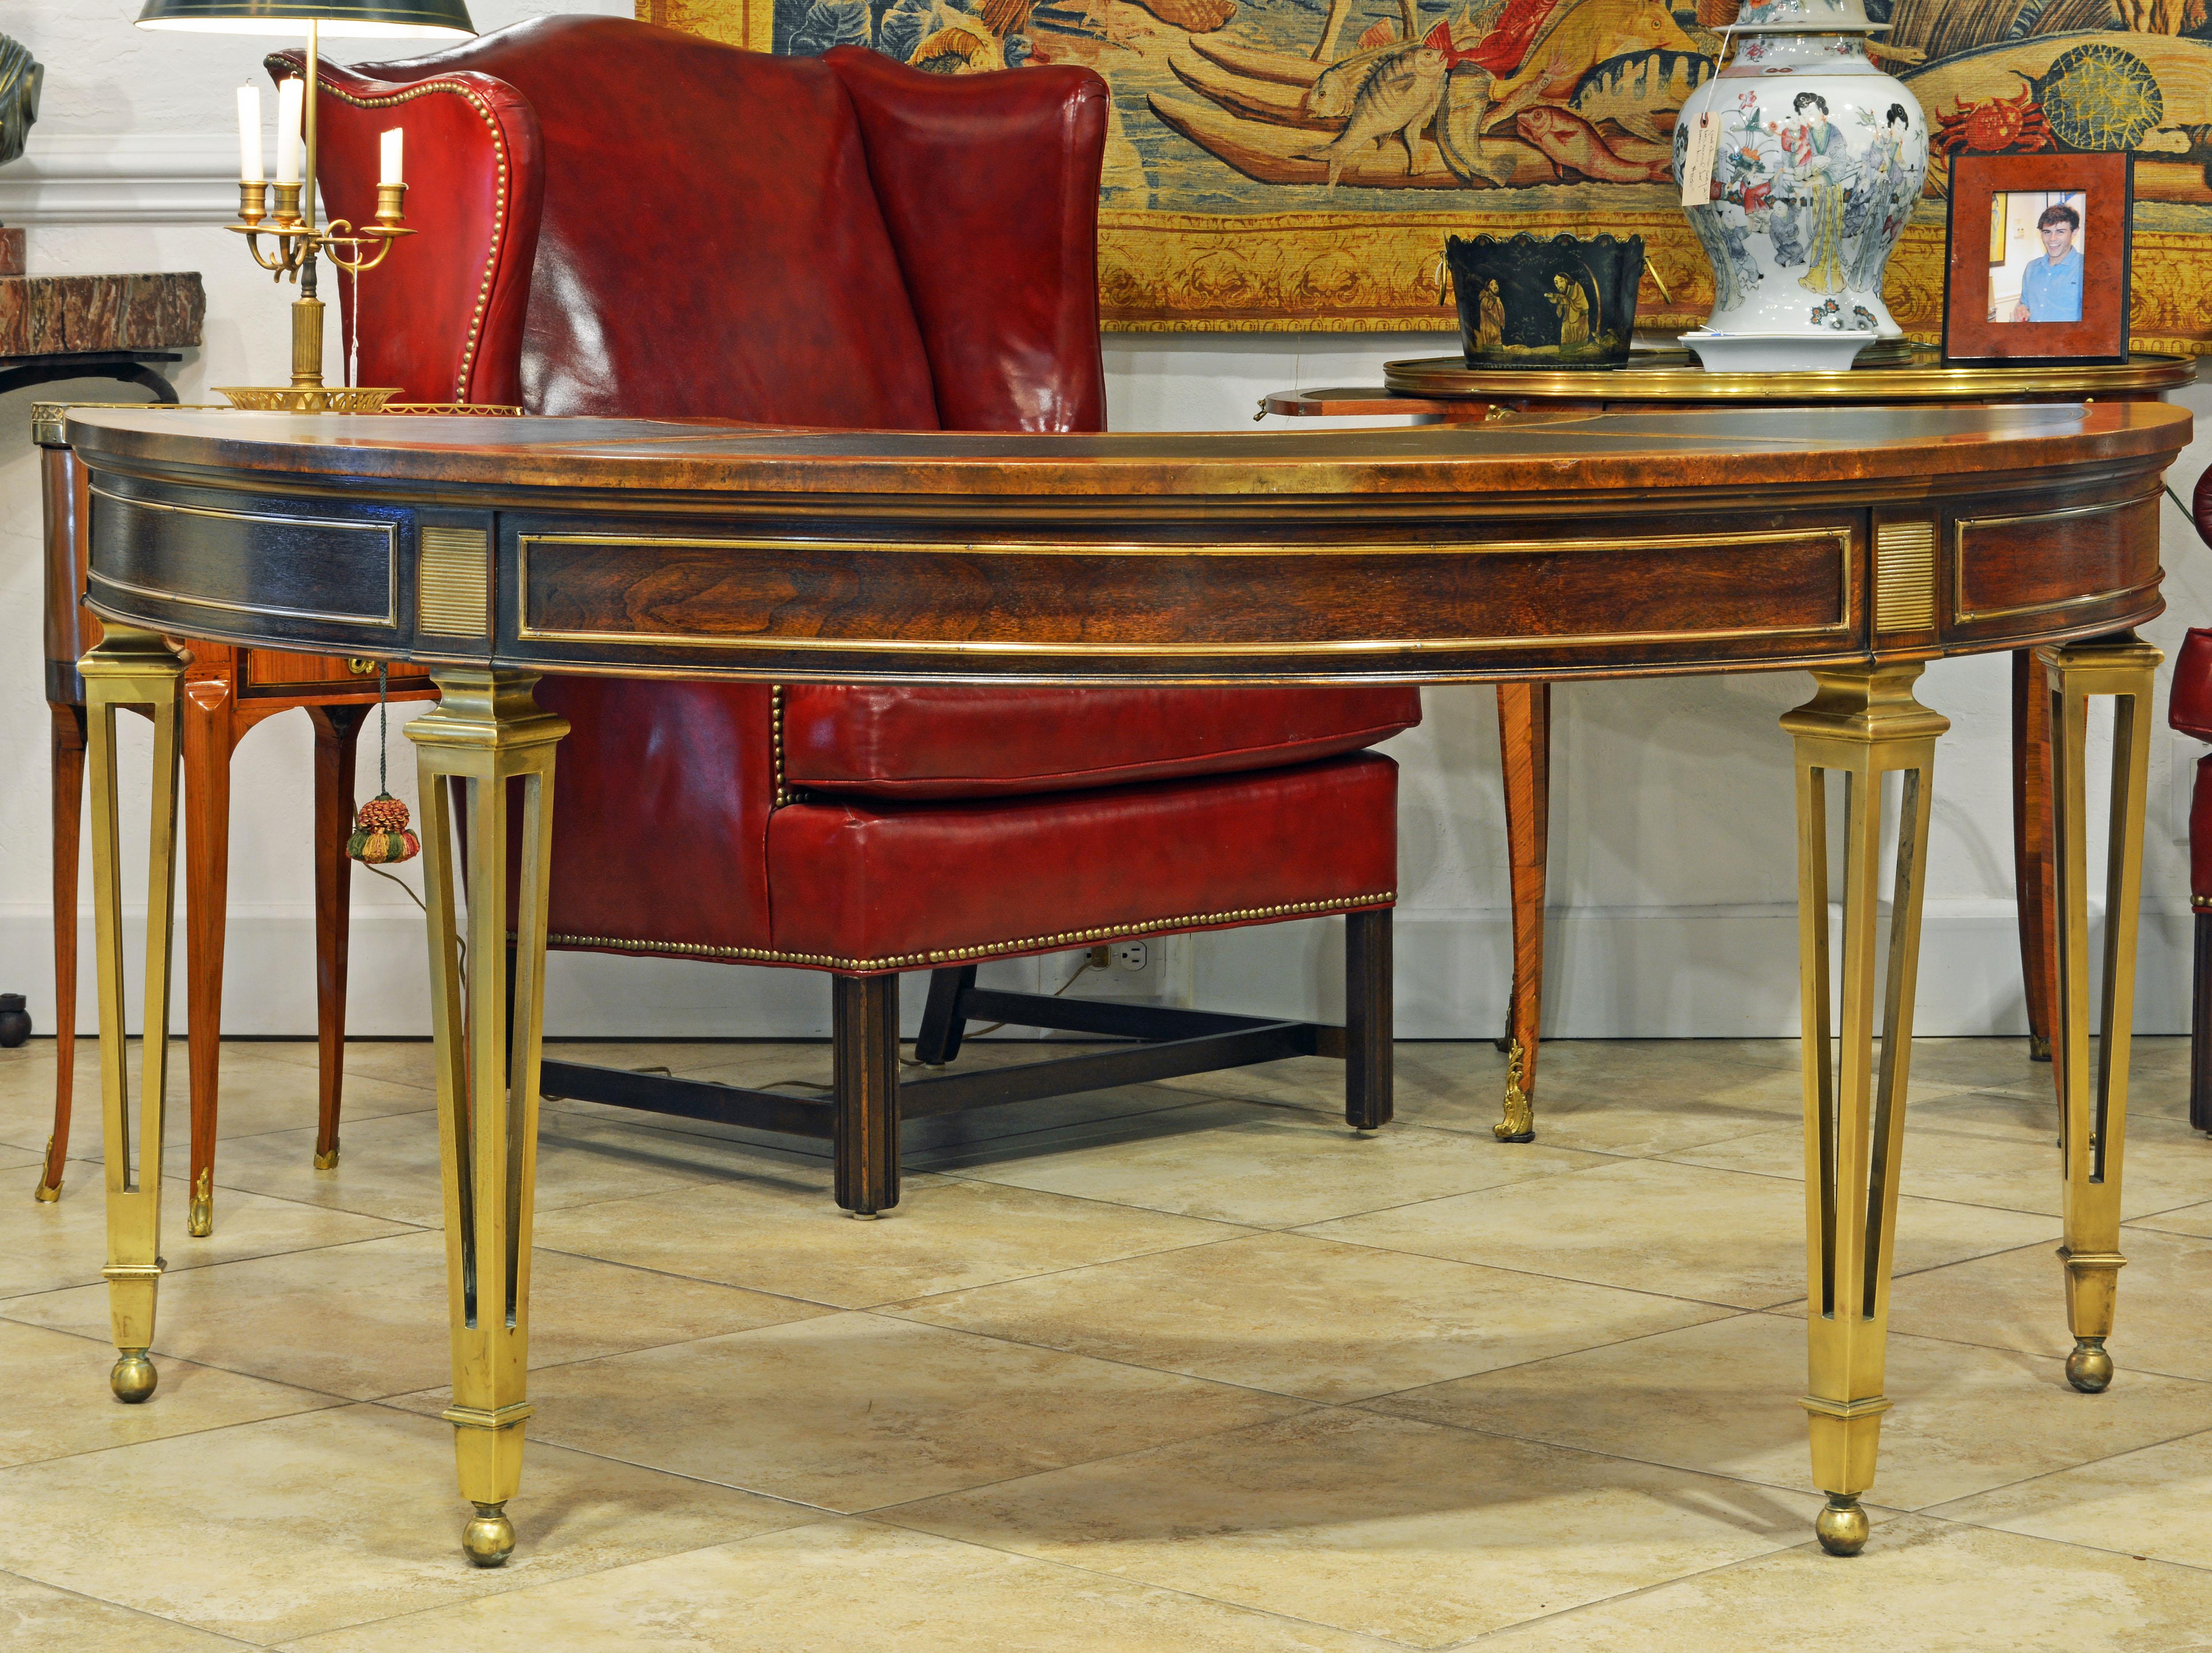 Exceptional Midcentury Semi Circular Brass and Burled Wood Desk by Mastercraft In Good Condition In Ft. Lauderdale, FL